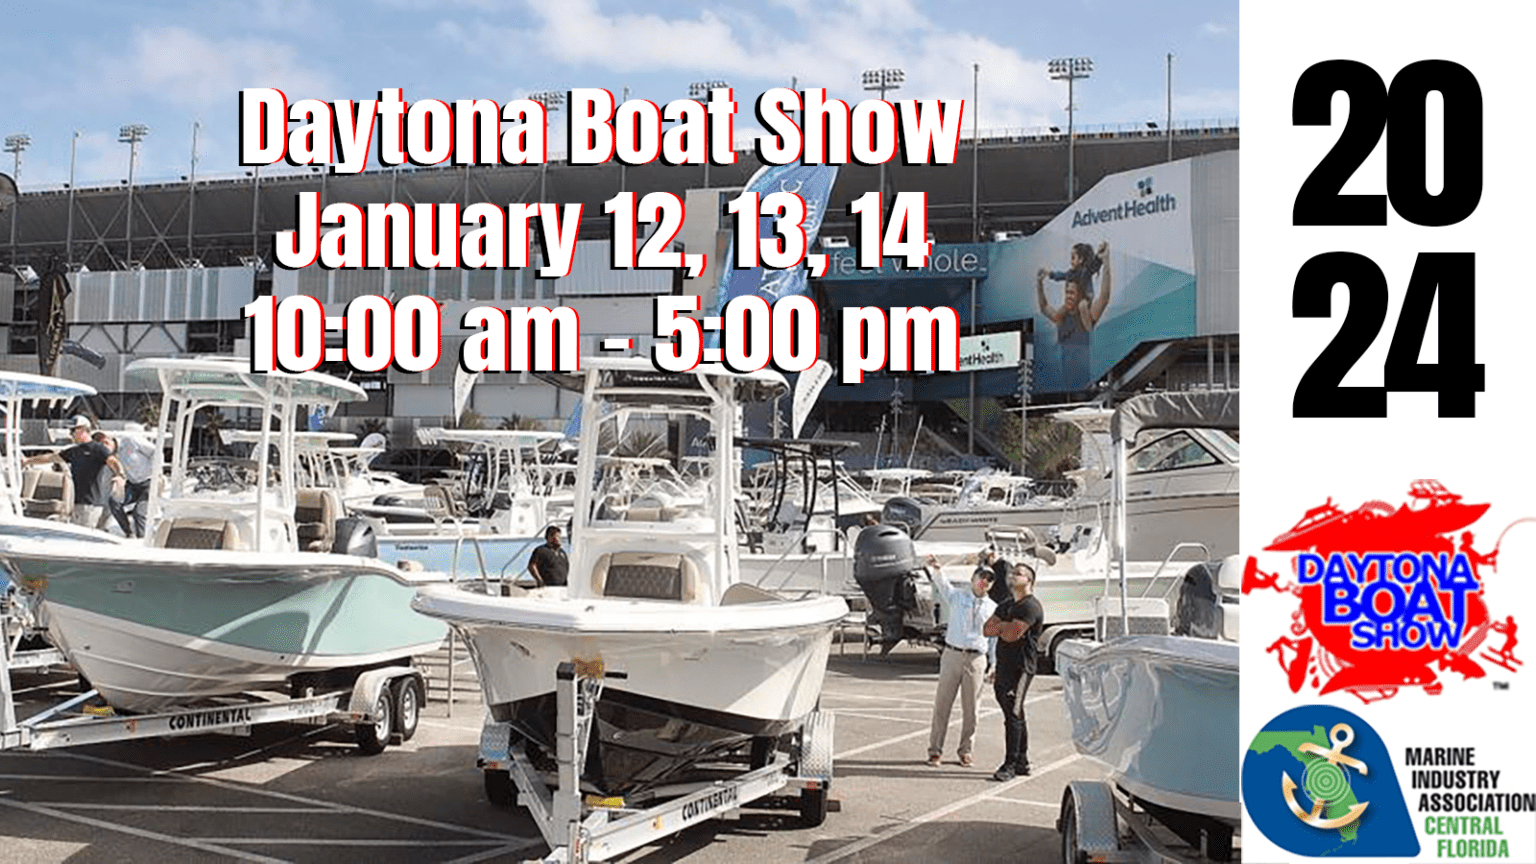 Fort Lauderdale The greatest boat show worldwide